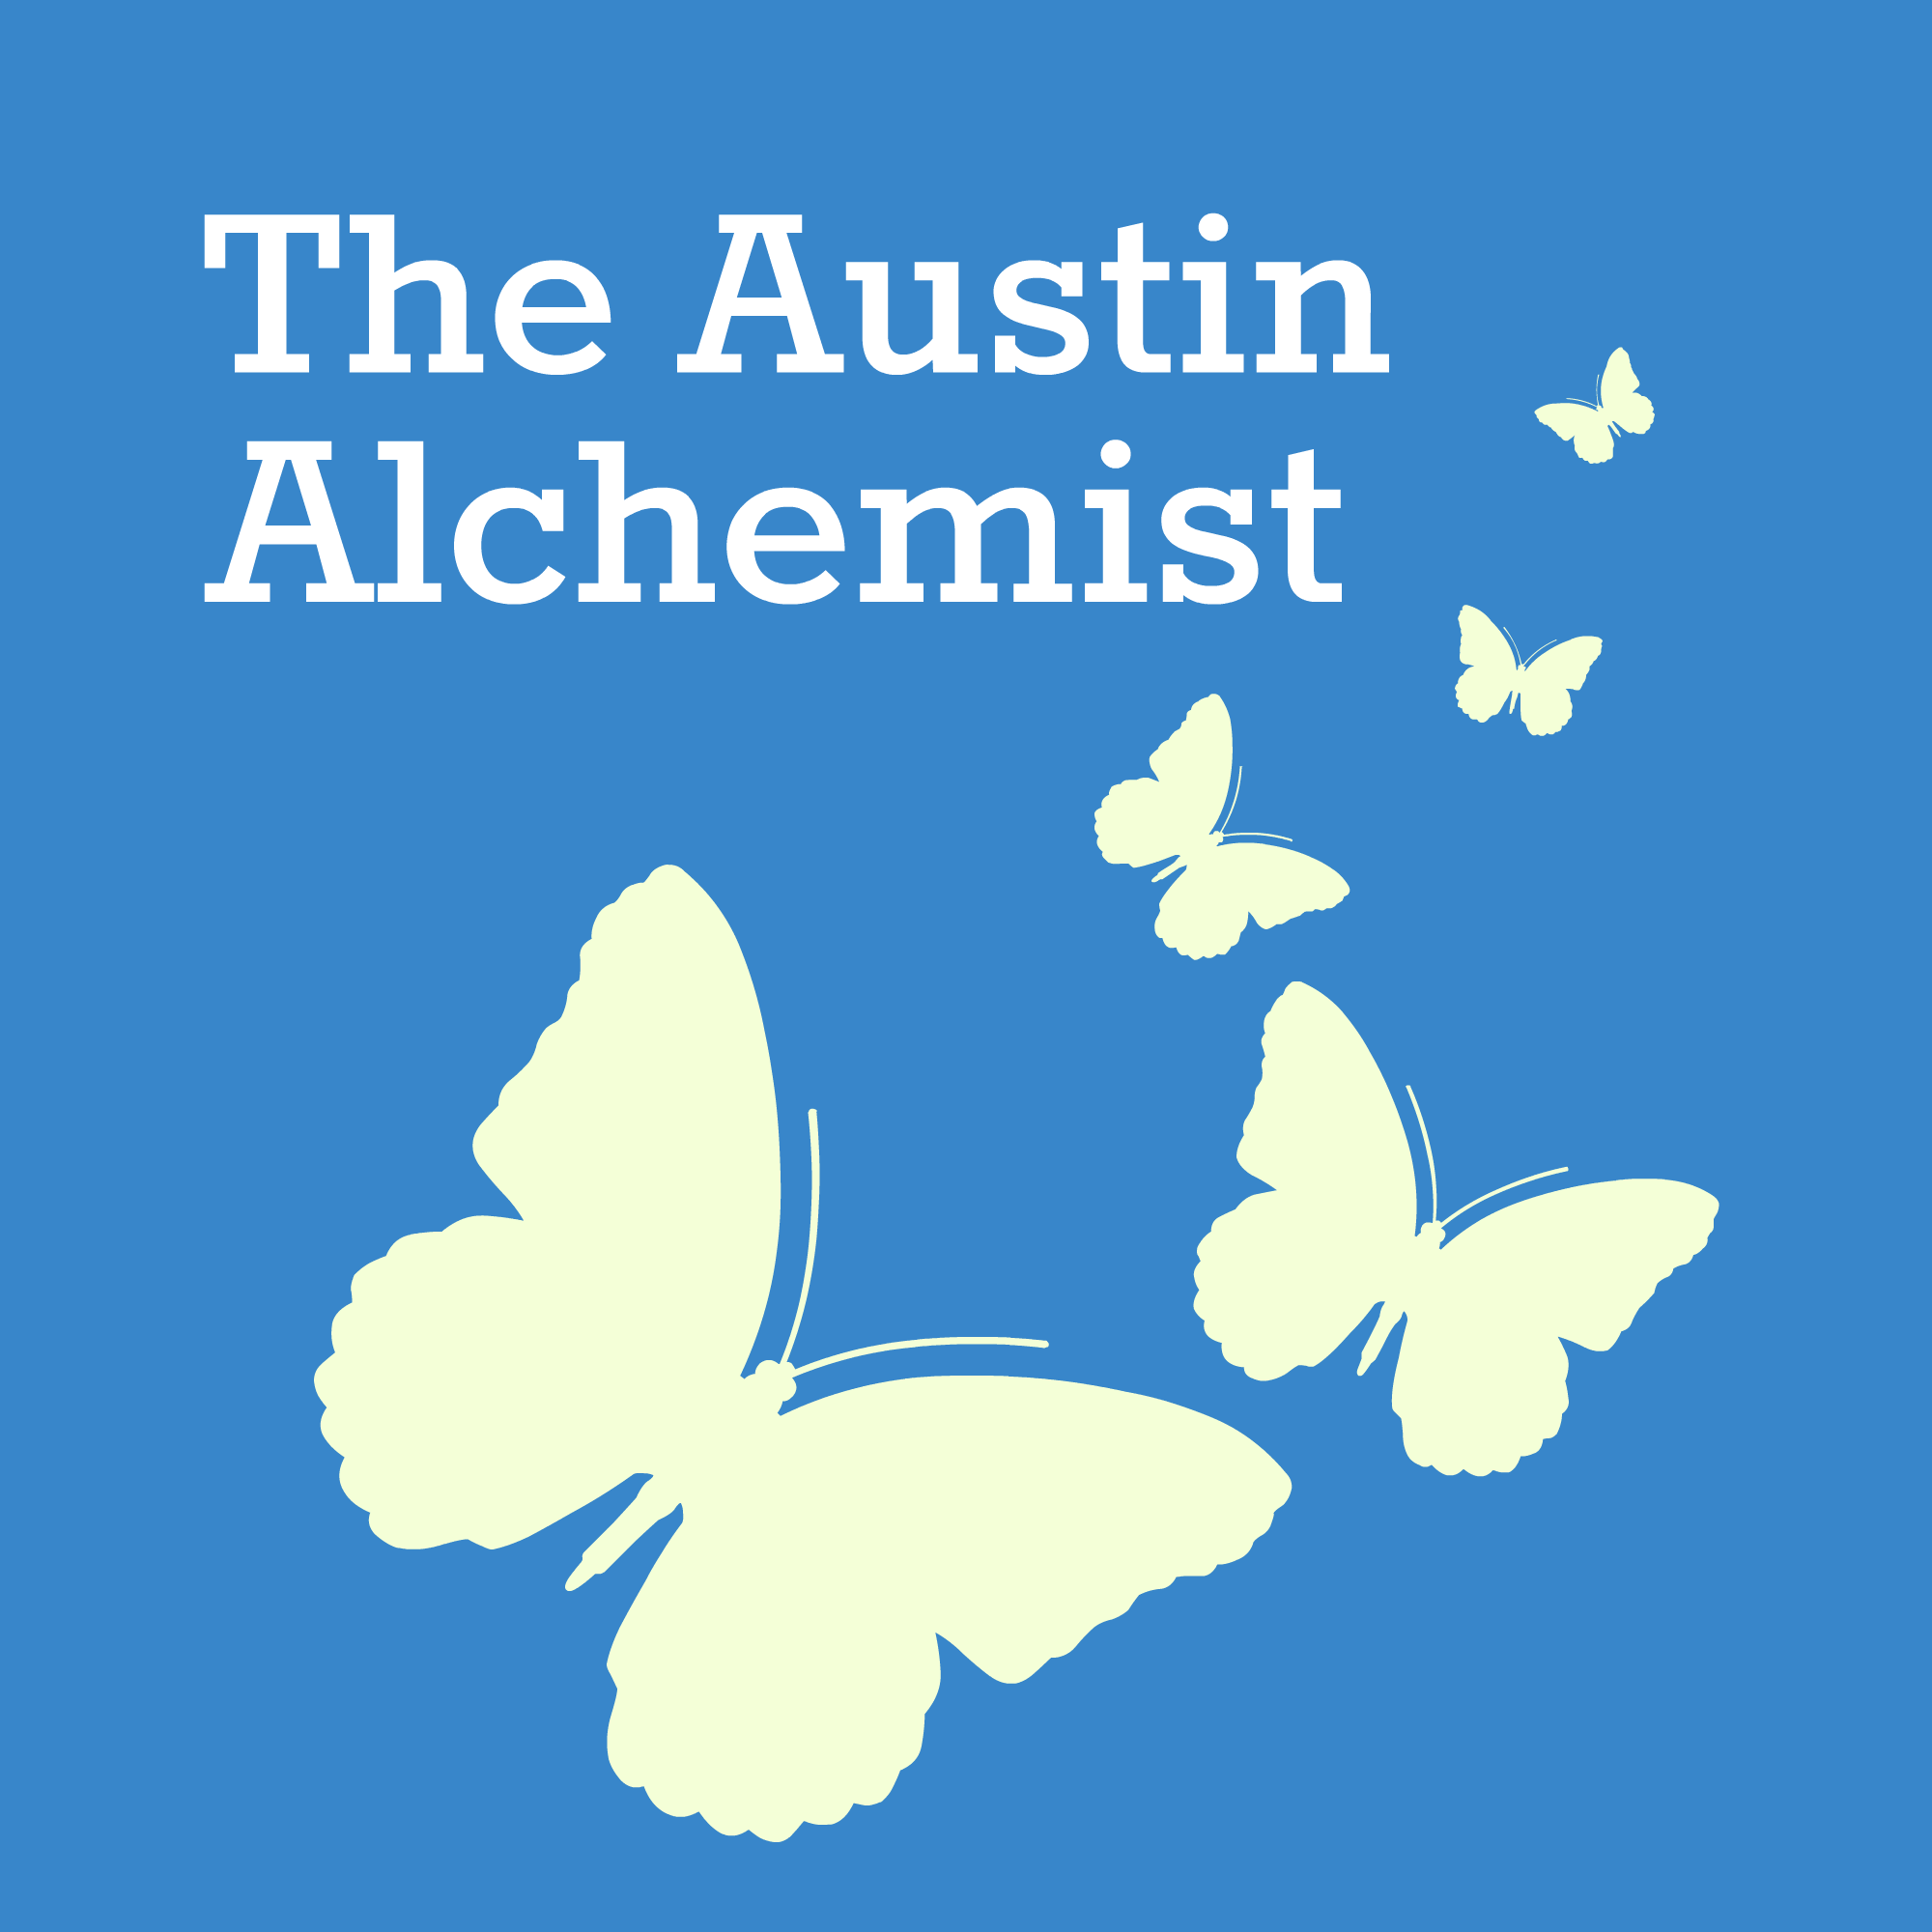 The Austin Alchemist - Holistic, Spiritual and Metaphysical Events and Resources